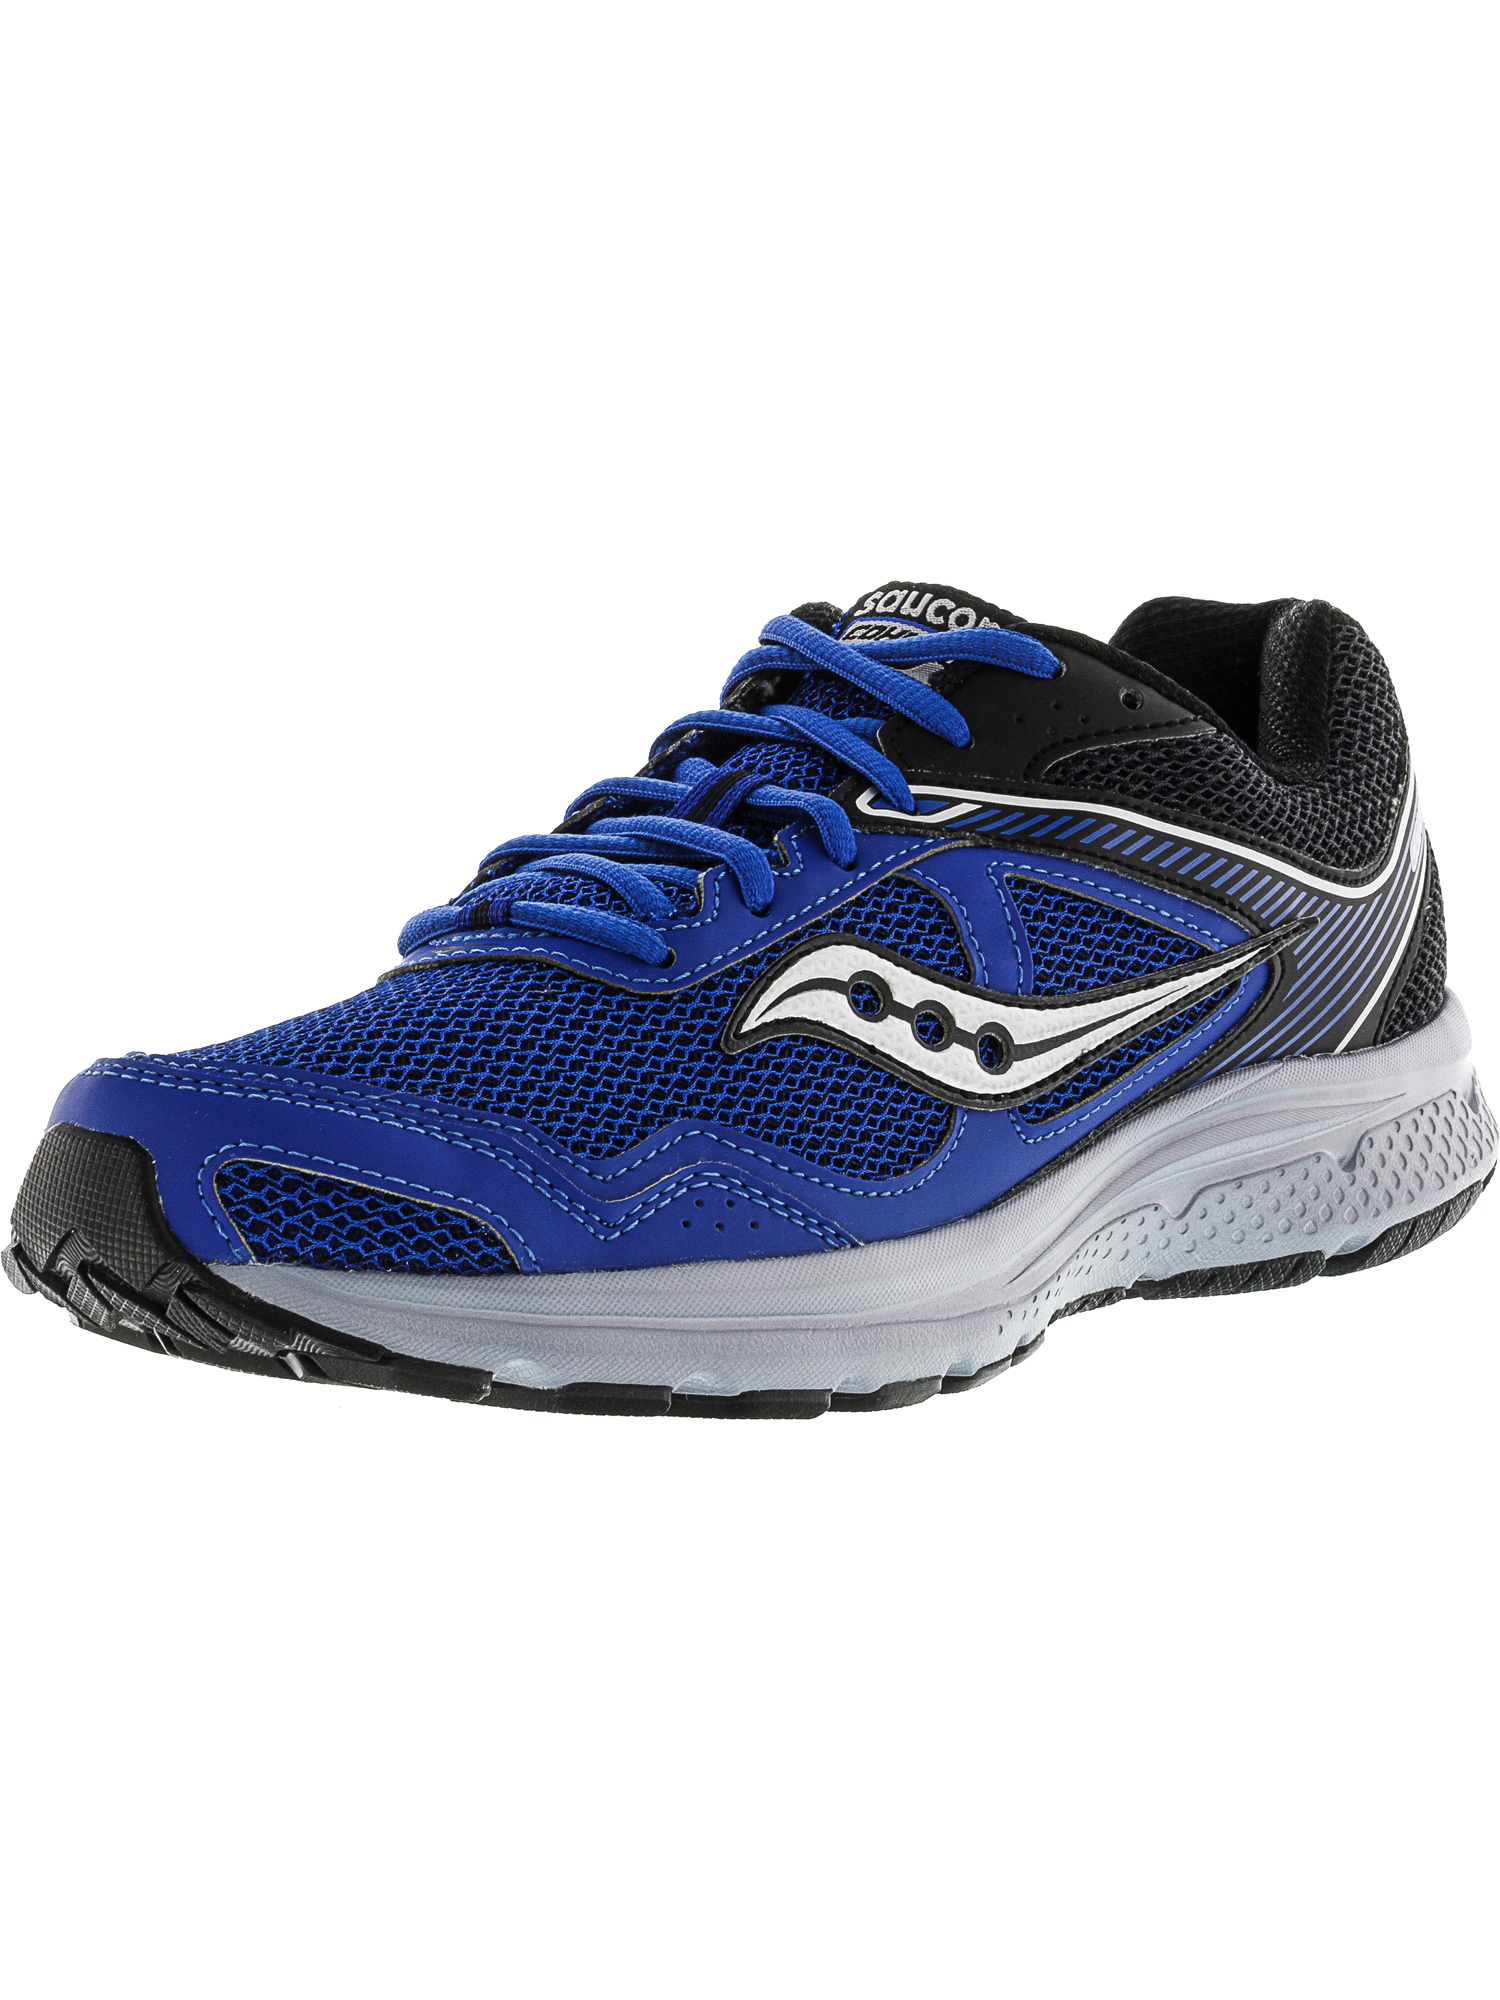 saucony cohesion 10 running shoe